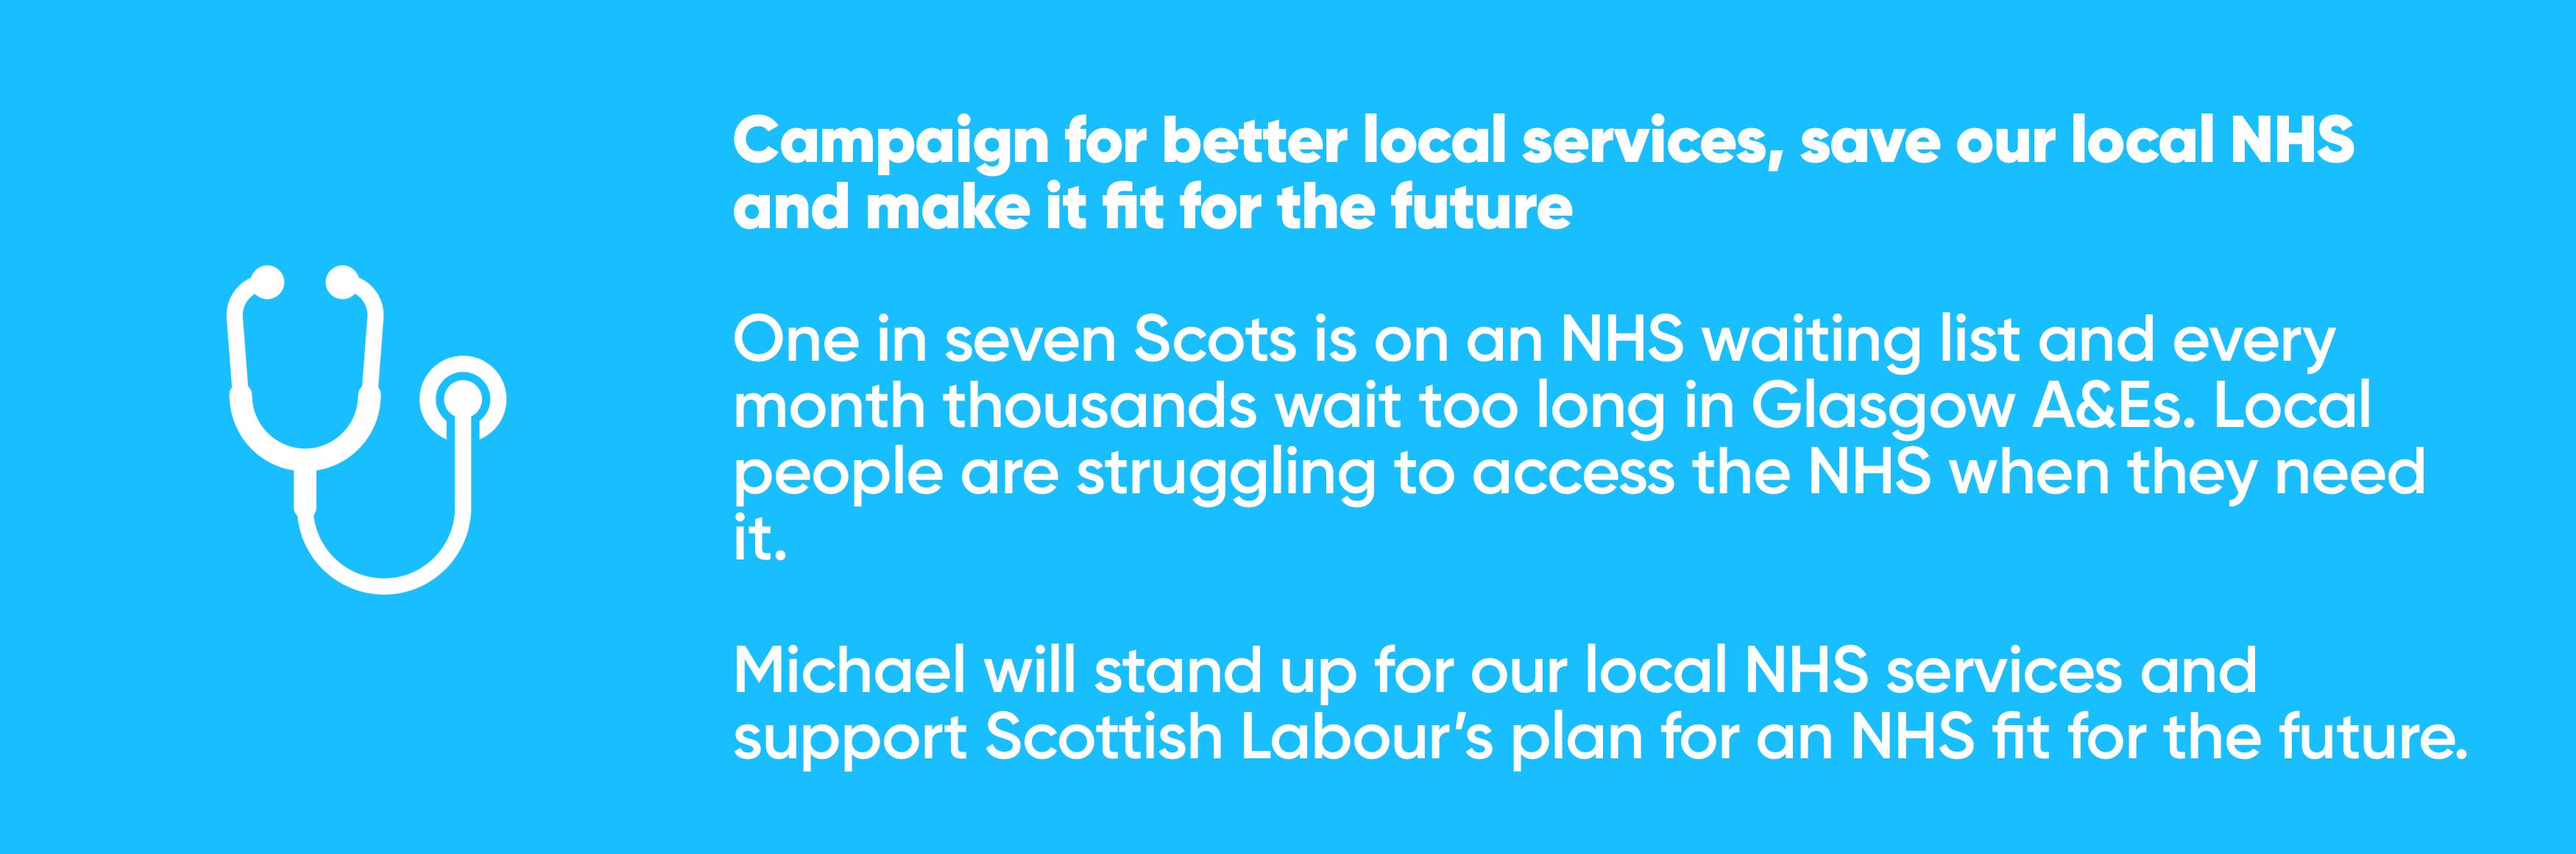 Campaign for better local services, save our local NHS and make it fit for the future